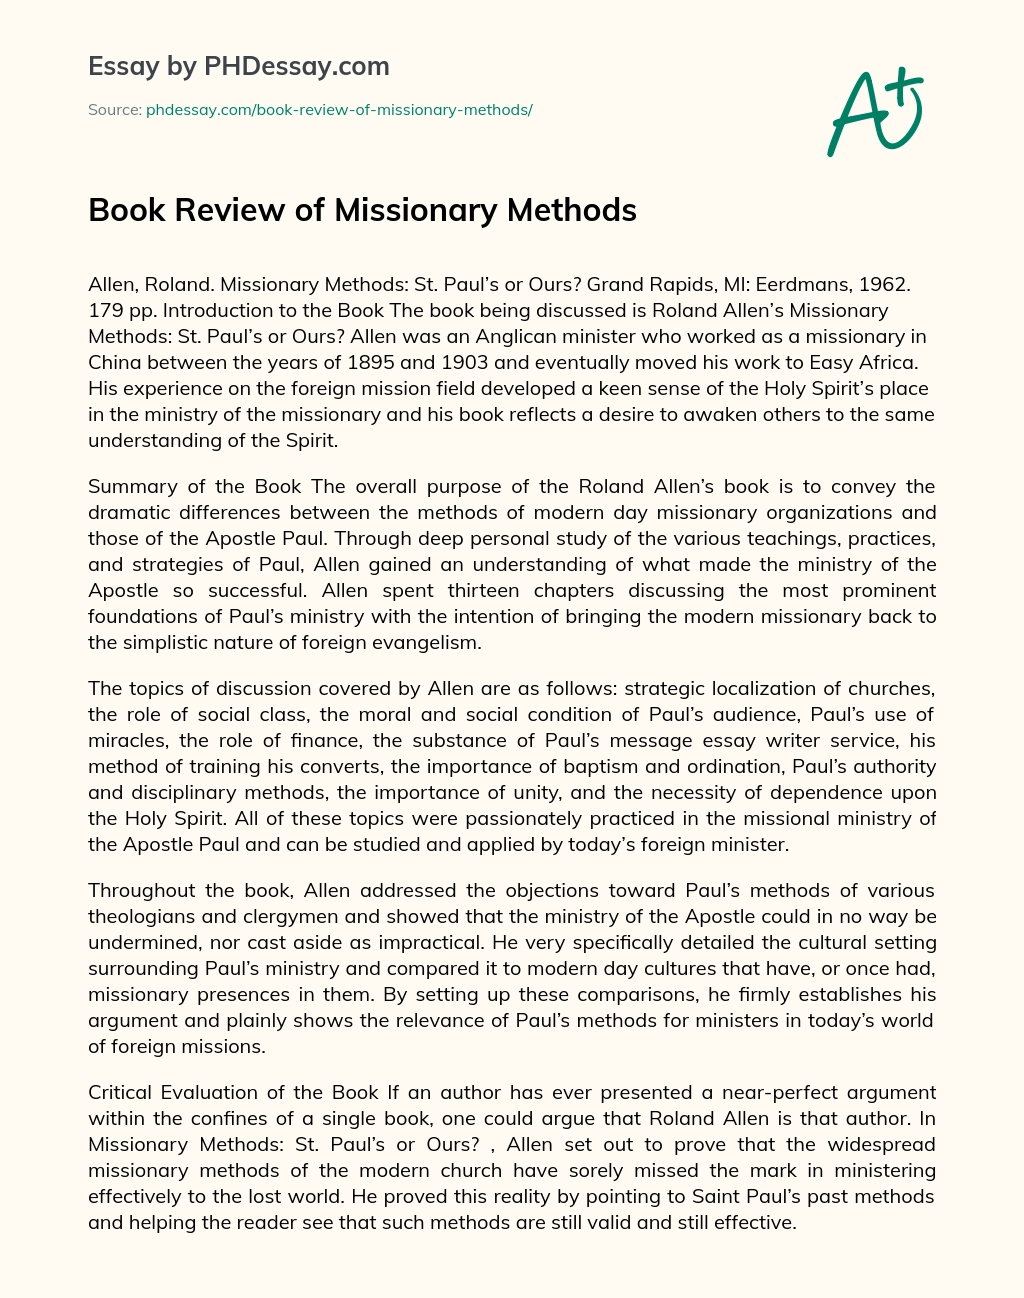 Book Review of Missionary Methods essay